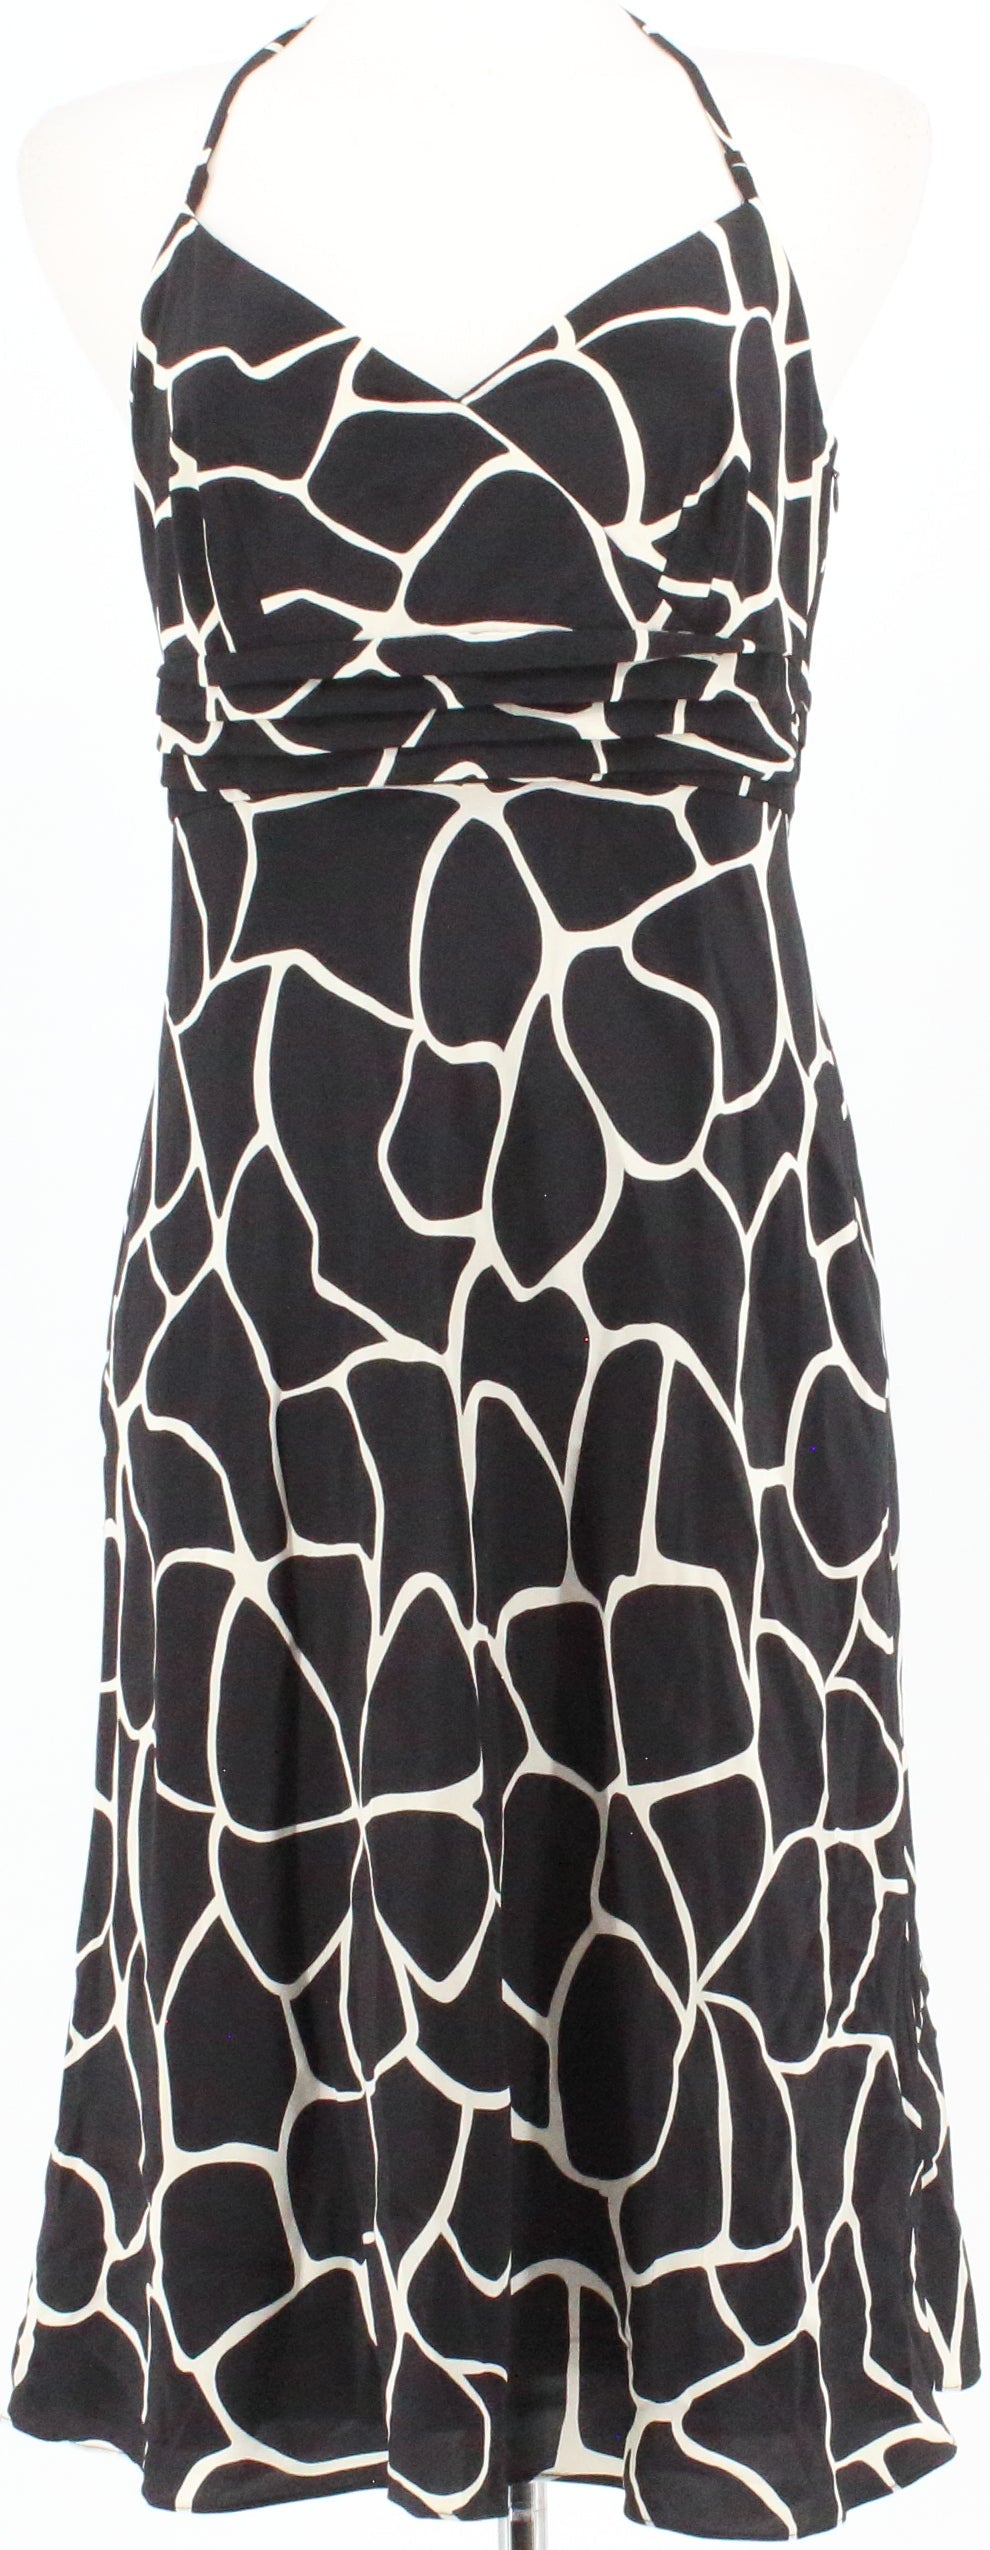 Ann Taylor Black and Off White Print Open-Back Dress